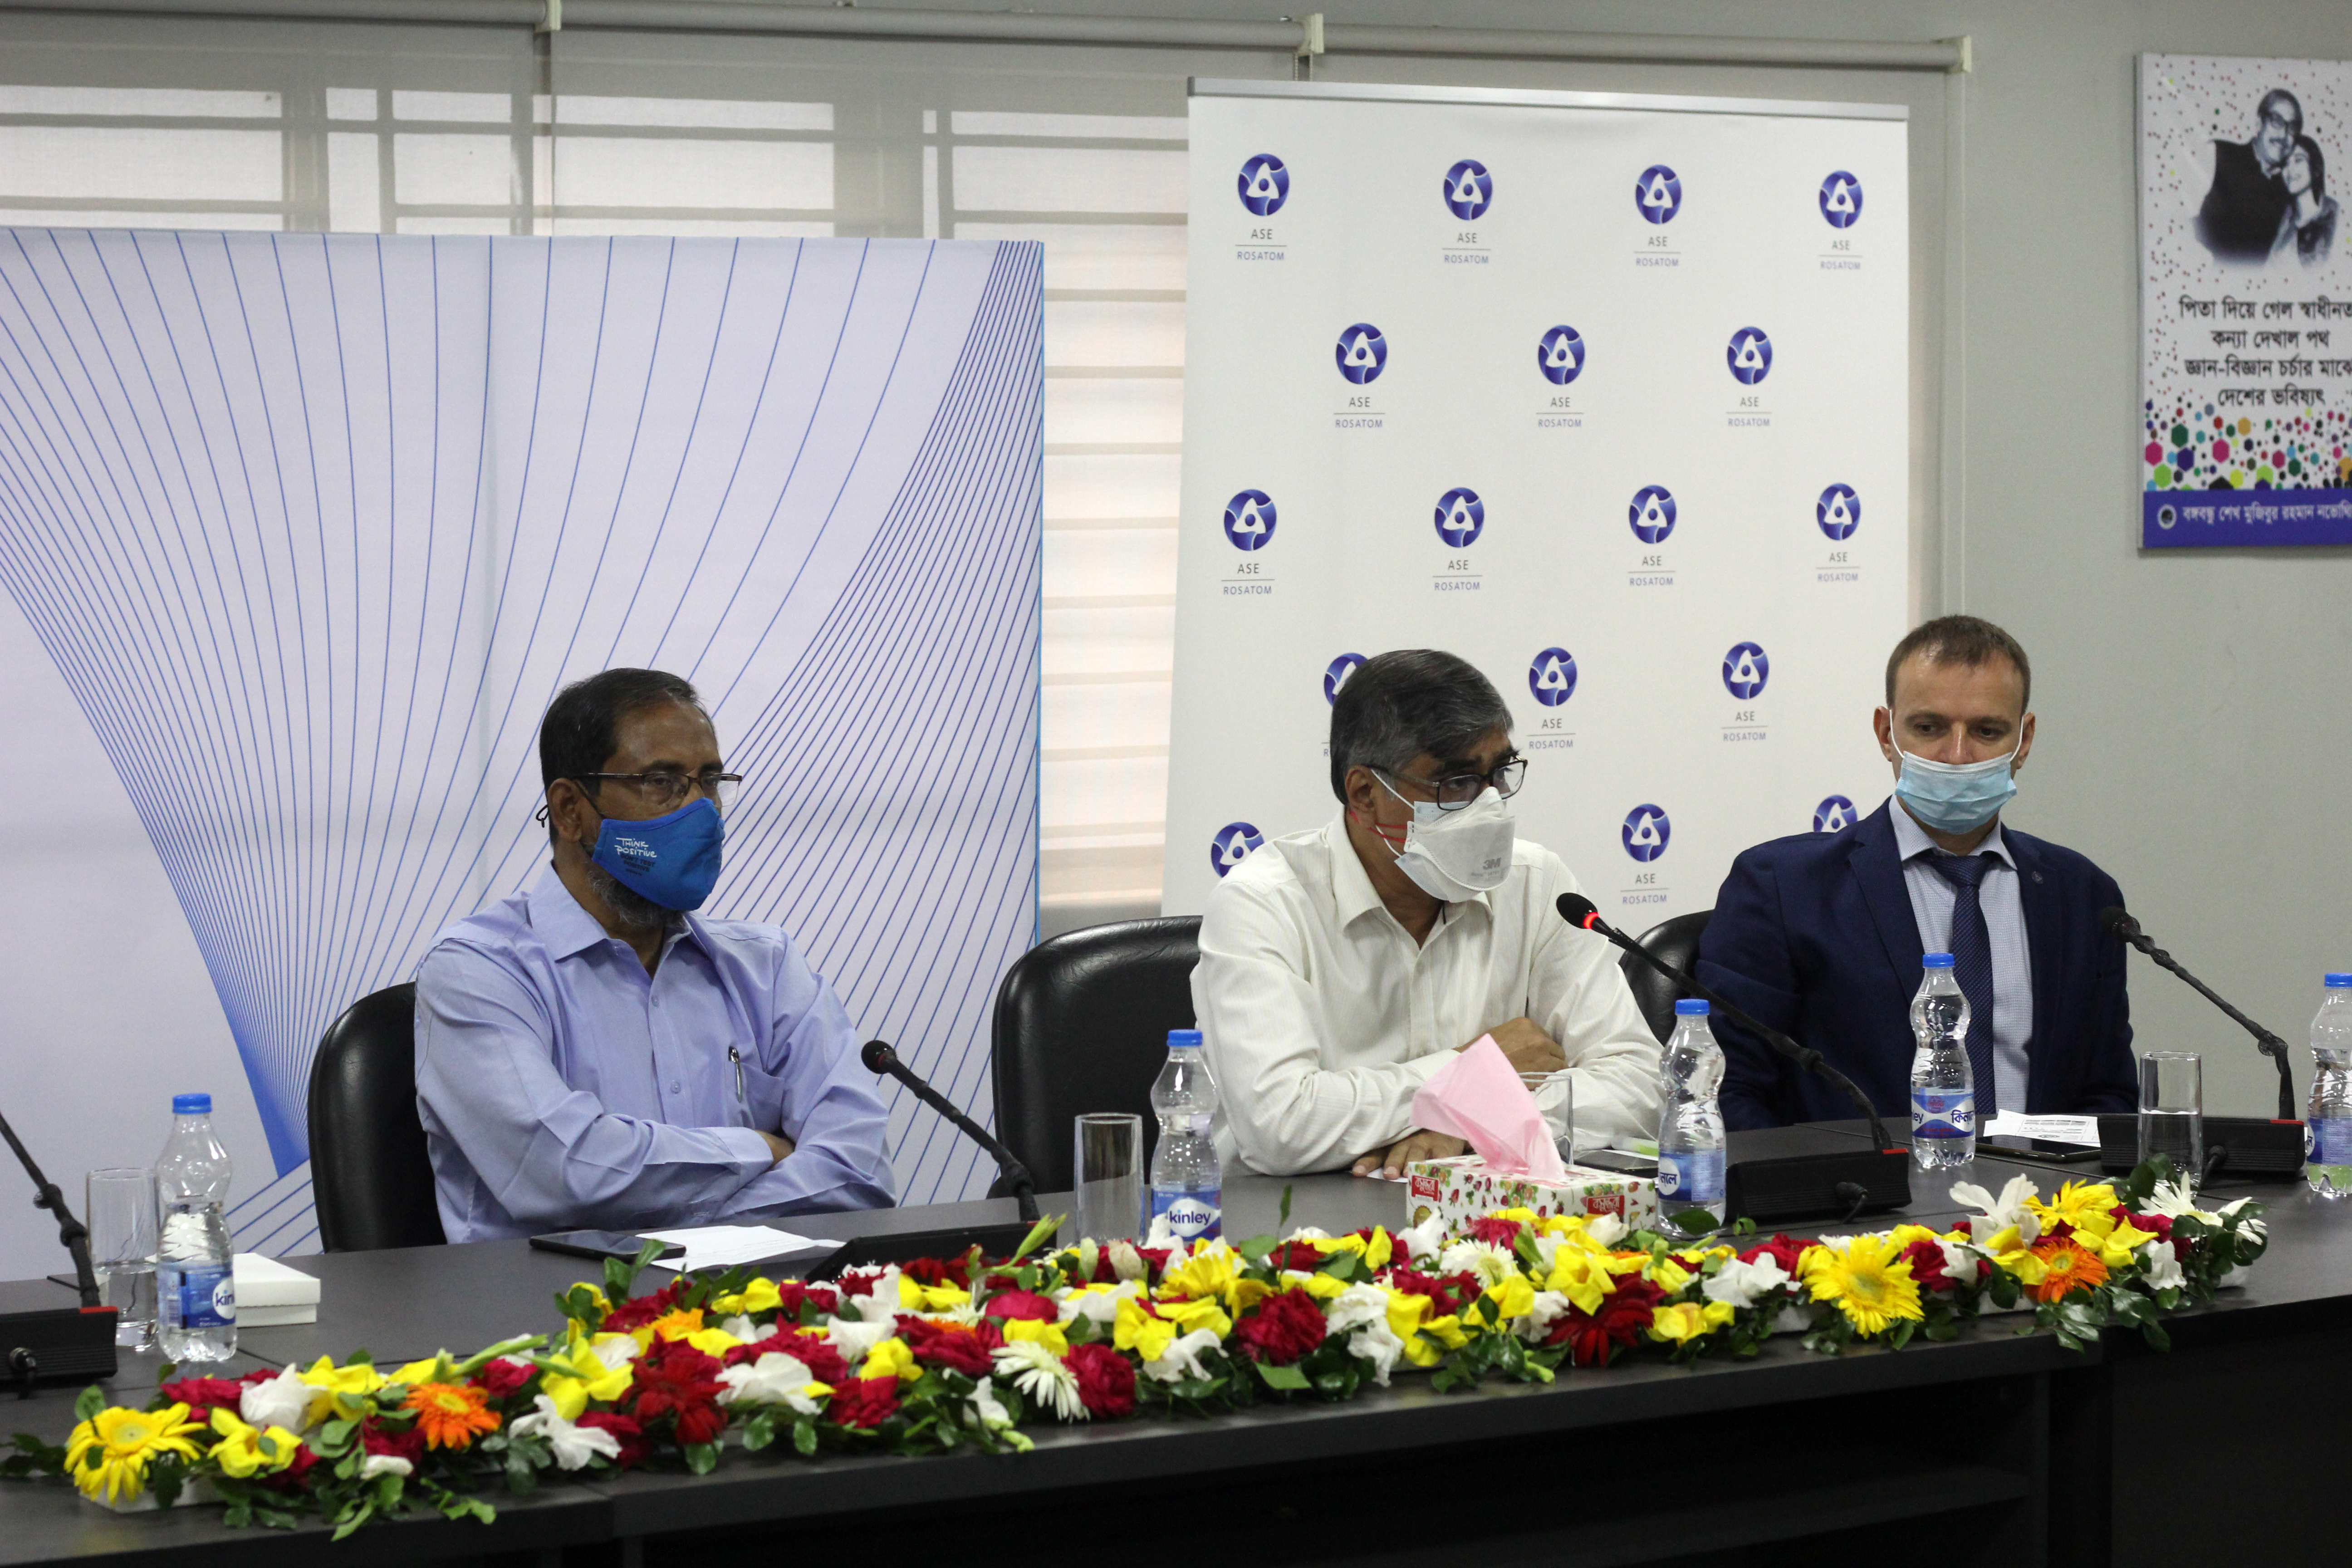 Russian State Corporation Rosatom Organized a Series of Communication Events for Bangladesh Media